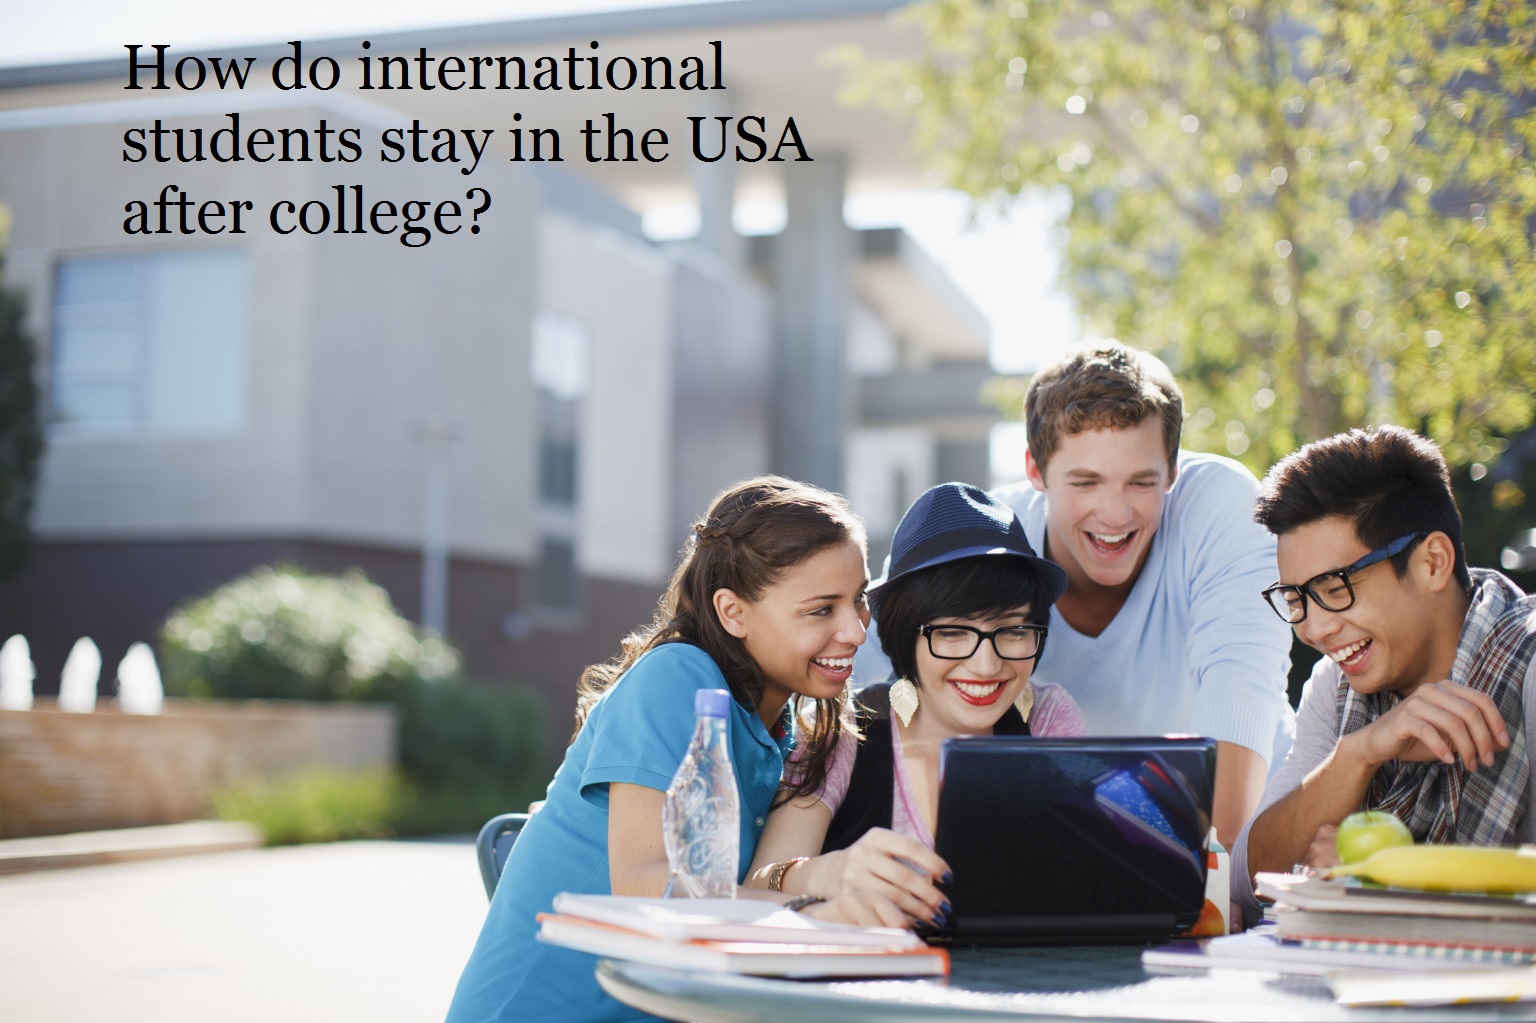 How do international students stay in the USA after college?